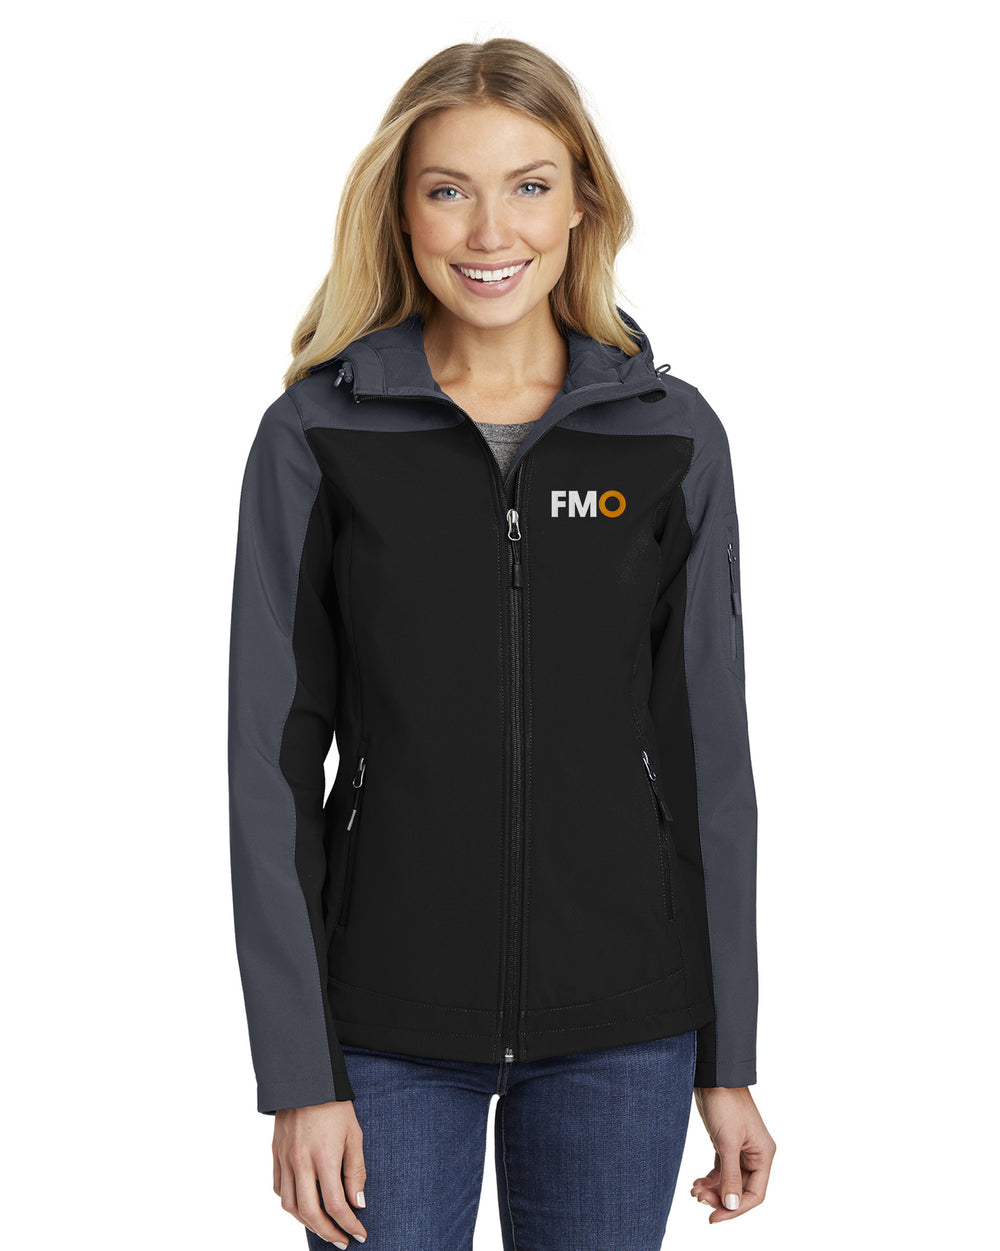 FMOK Outlet - Port Authority Ladies Hooded Core Soft Shell Jacket - L335